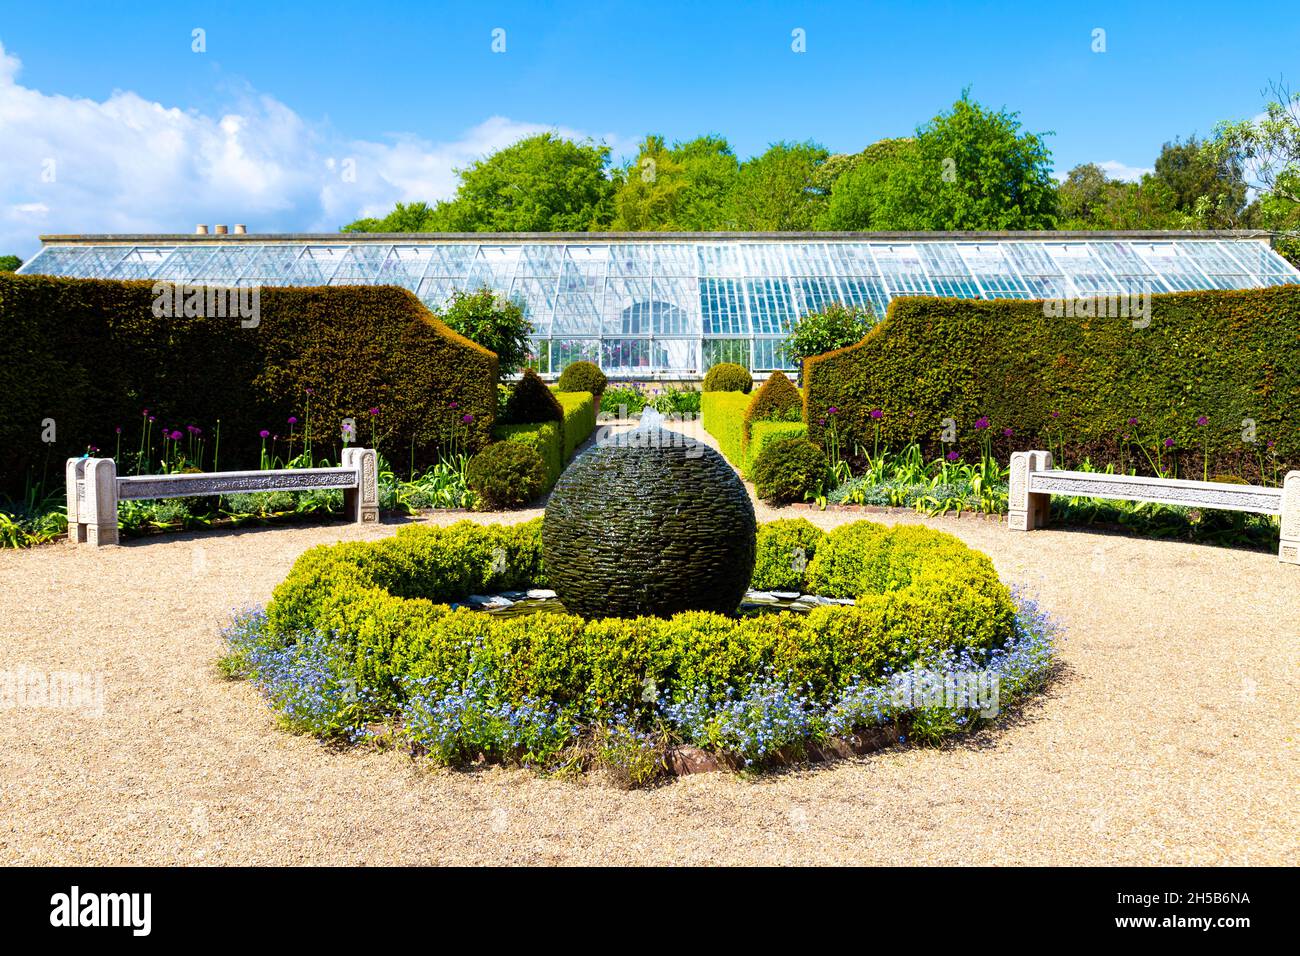 Spherical sculpture fountain and glasshouse in the back at the Flower Garden, Arundel Castle, West Sussex, UK Stock Photo